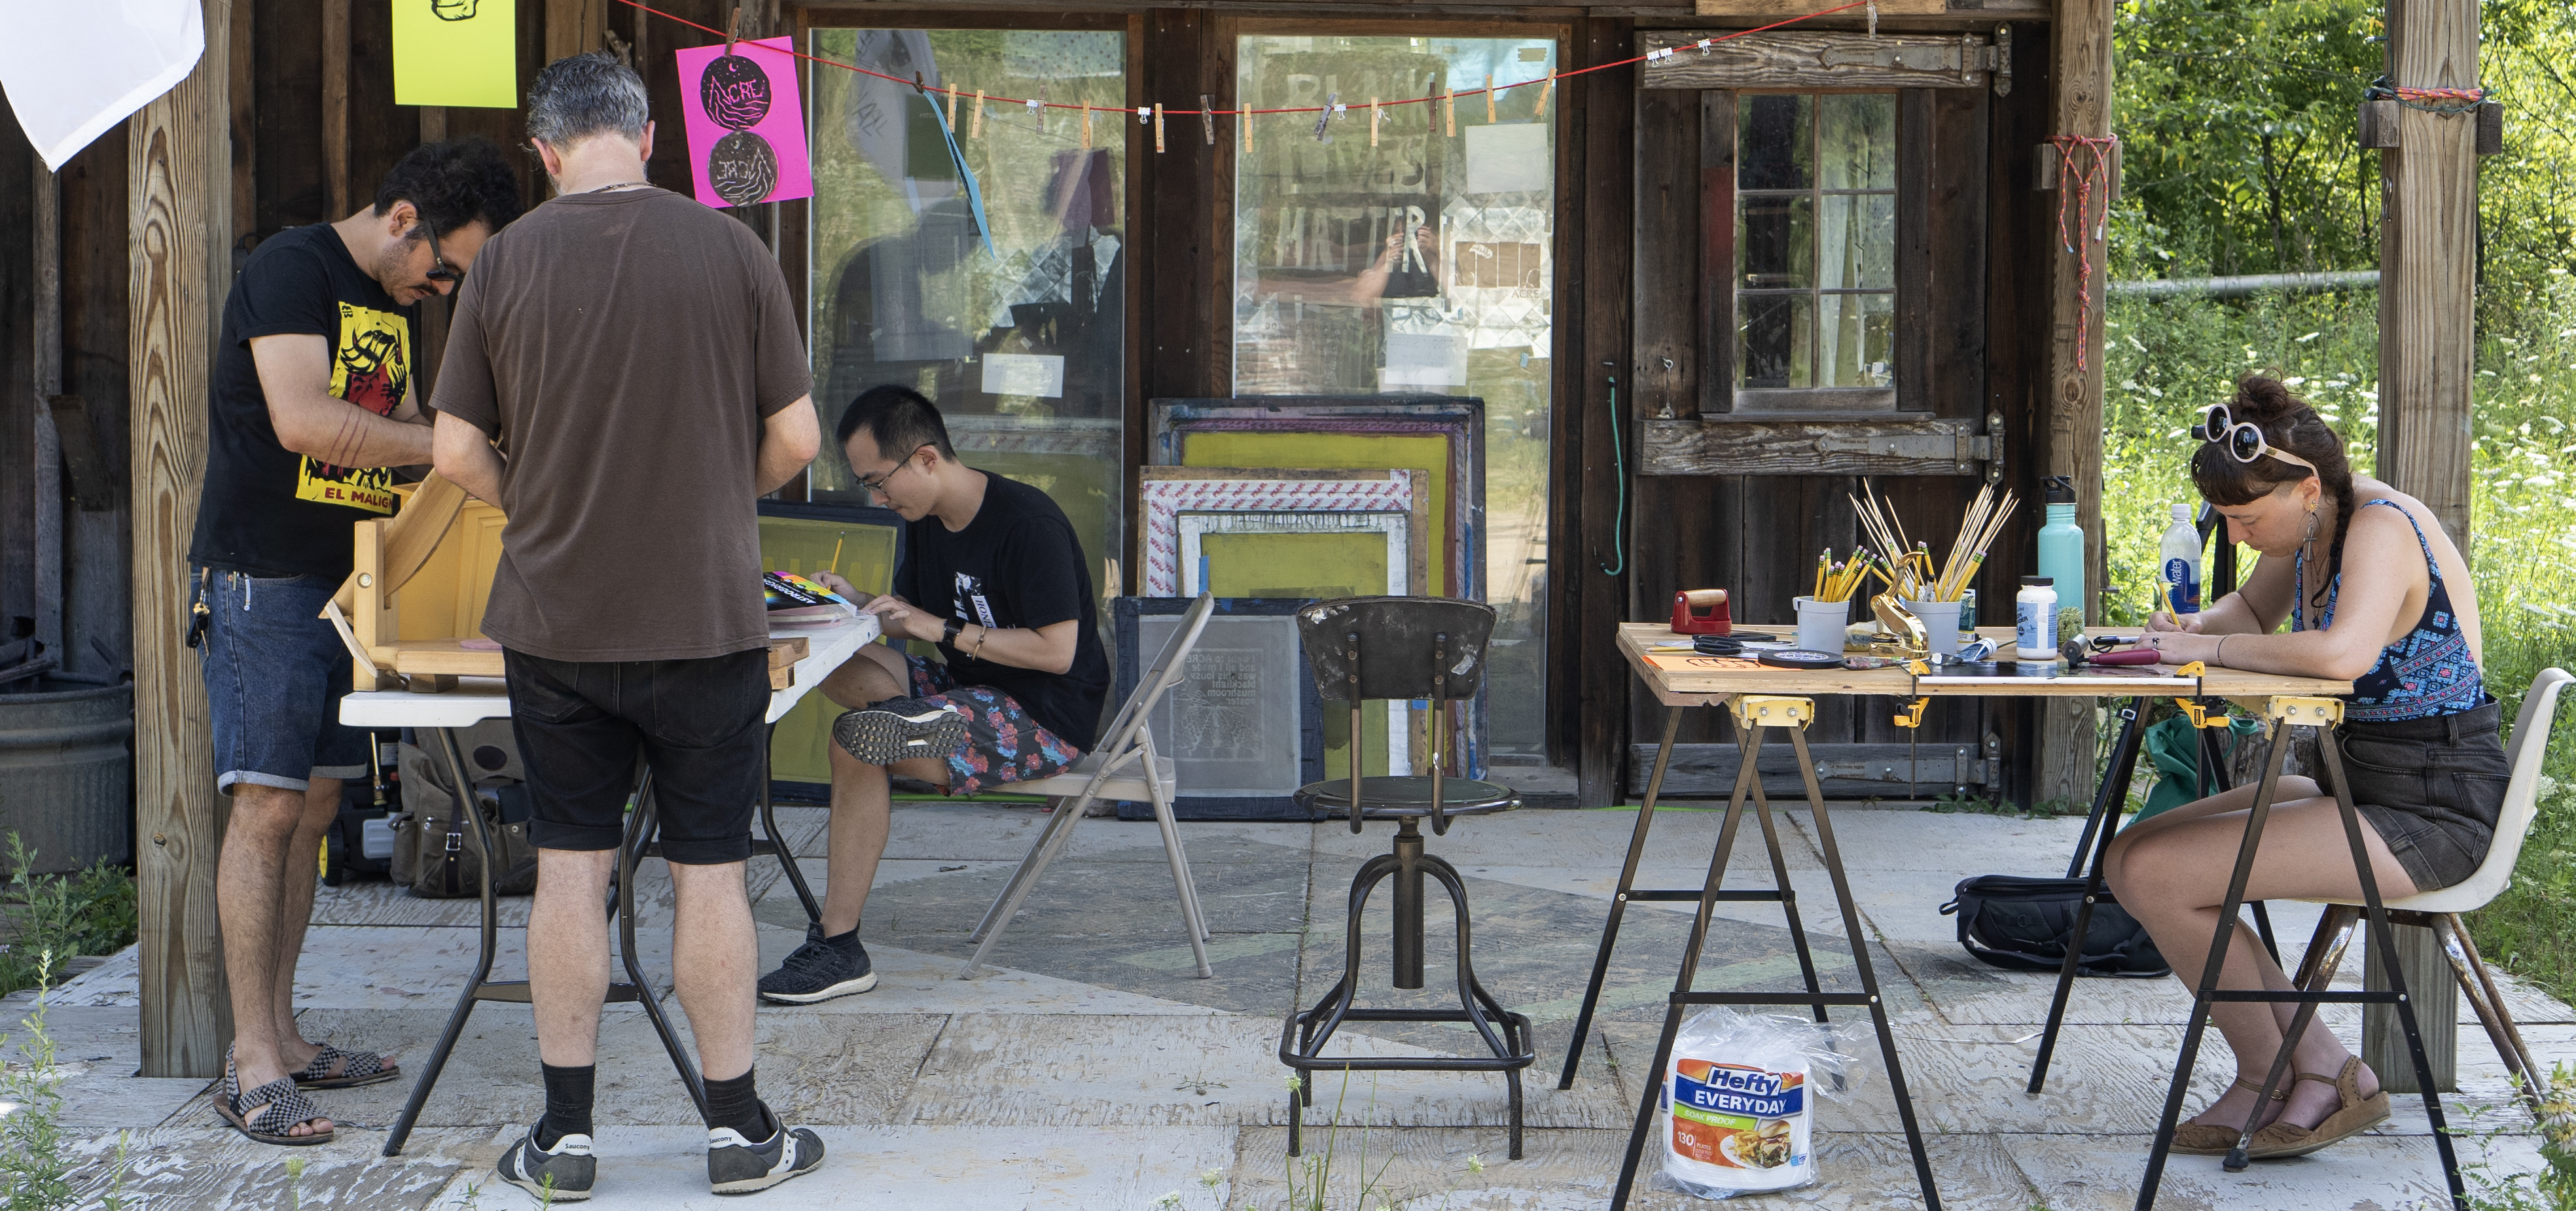 Four figures seated at tables with art supplies on a wooden outdoor porch, each focused intently on a different project.